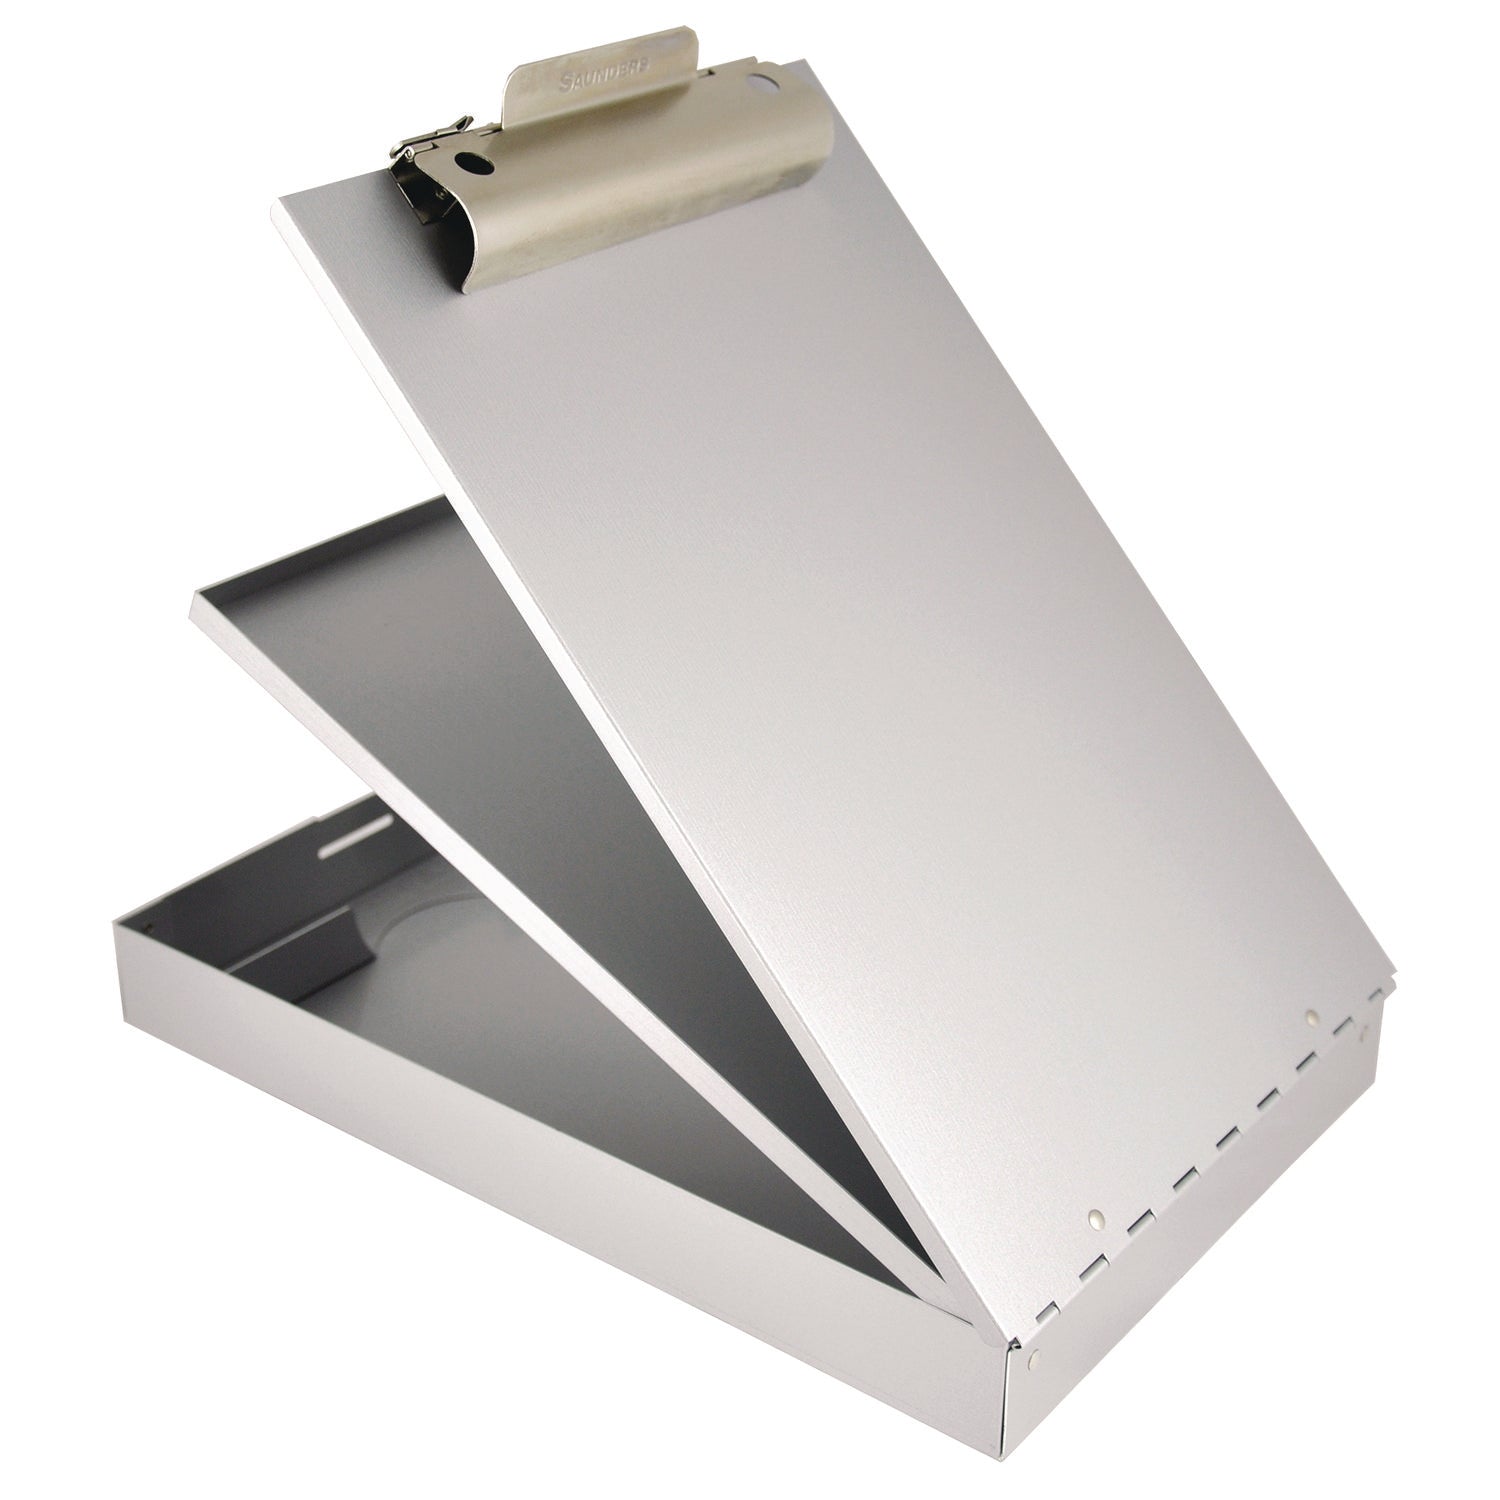 Cruiser Mate Aluminum Storage Clipboard, 1.5" Clip Capacity, Holds 8.5 x 11 Sheets, Silver - 